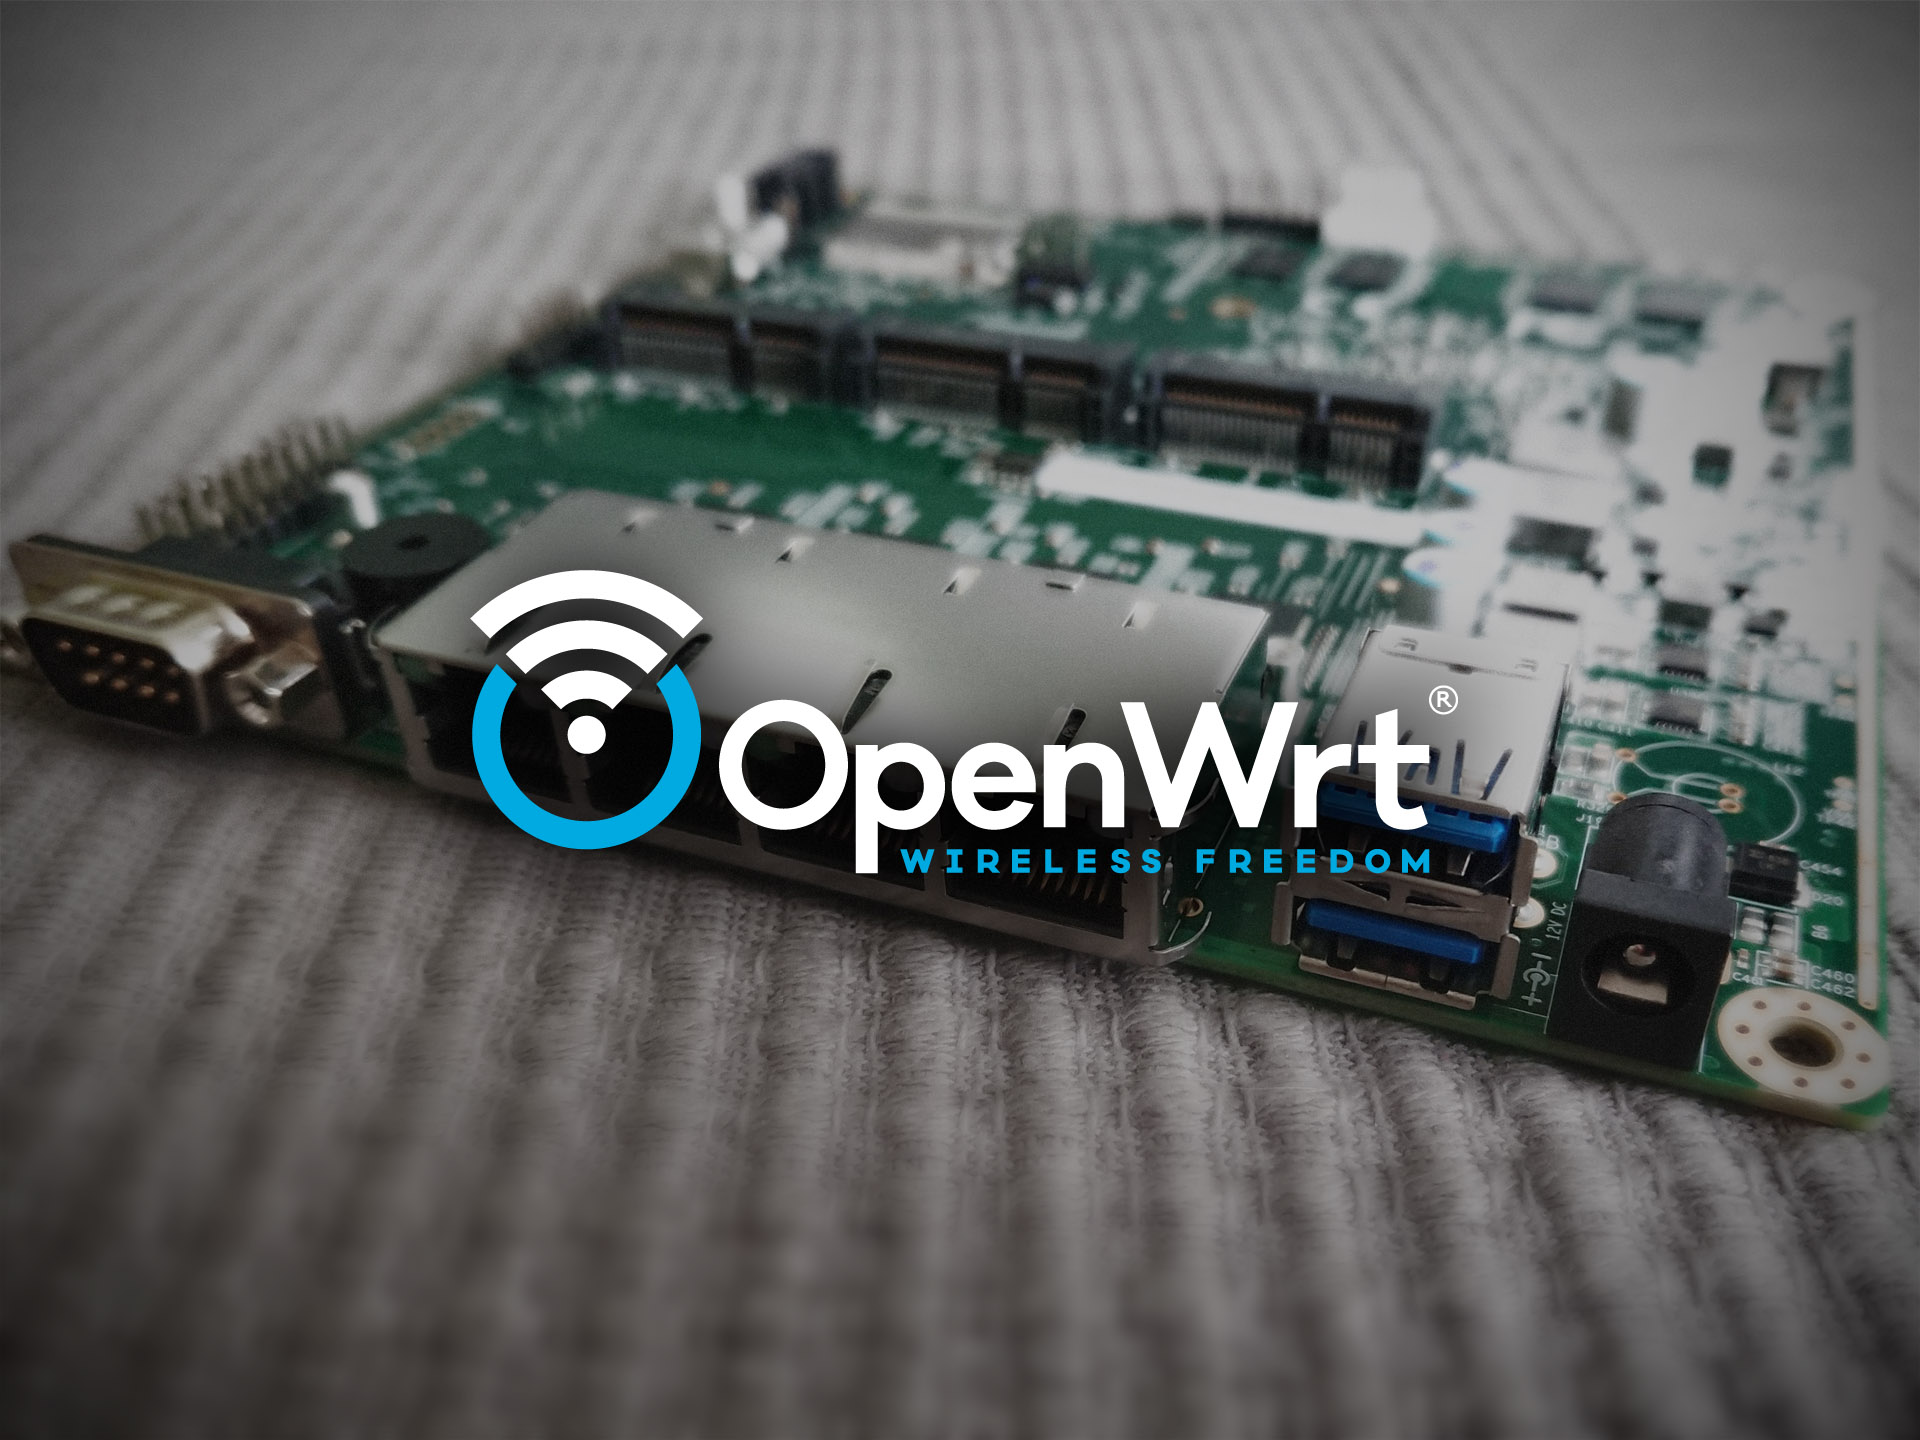 How to install OpenWrt packages in RAM “permanently” on space-constrained devices